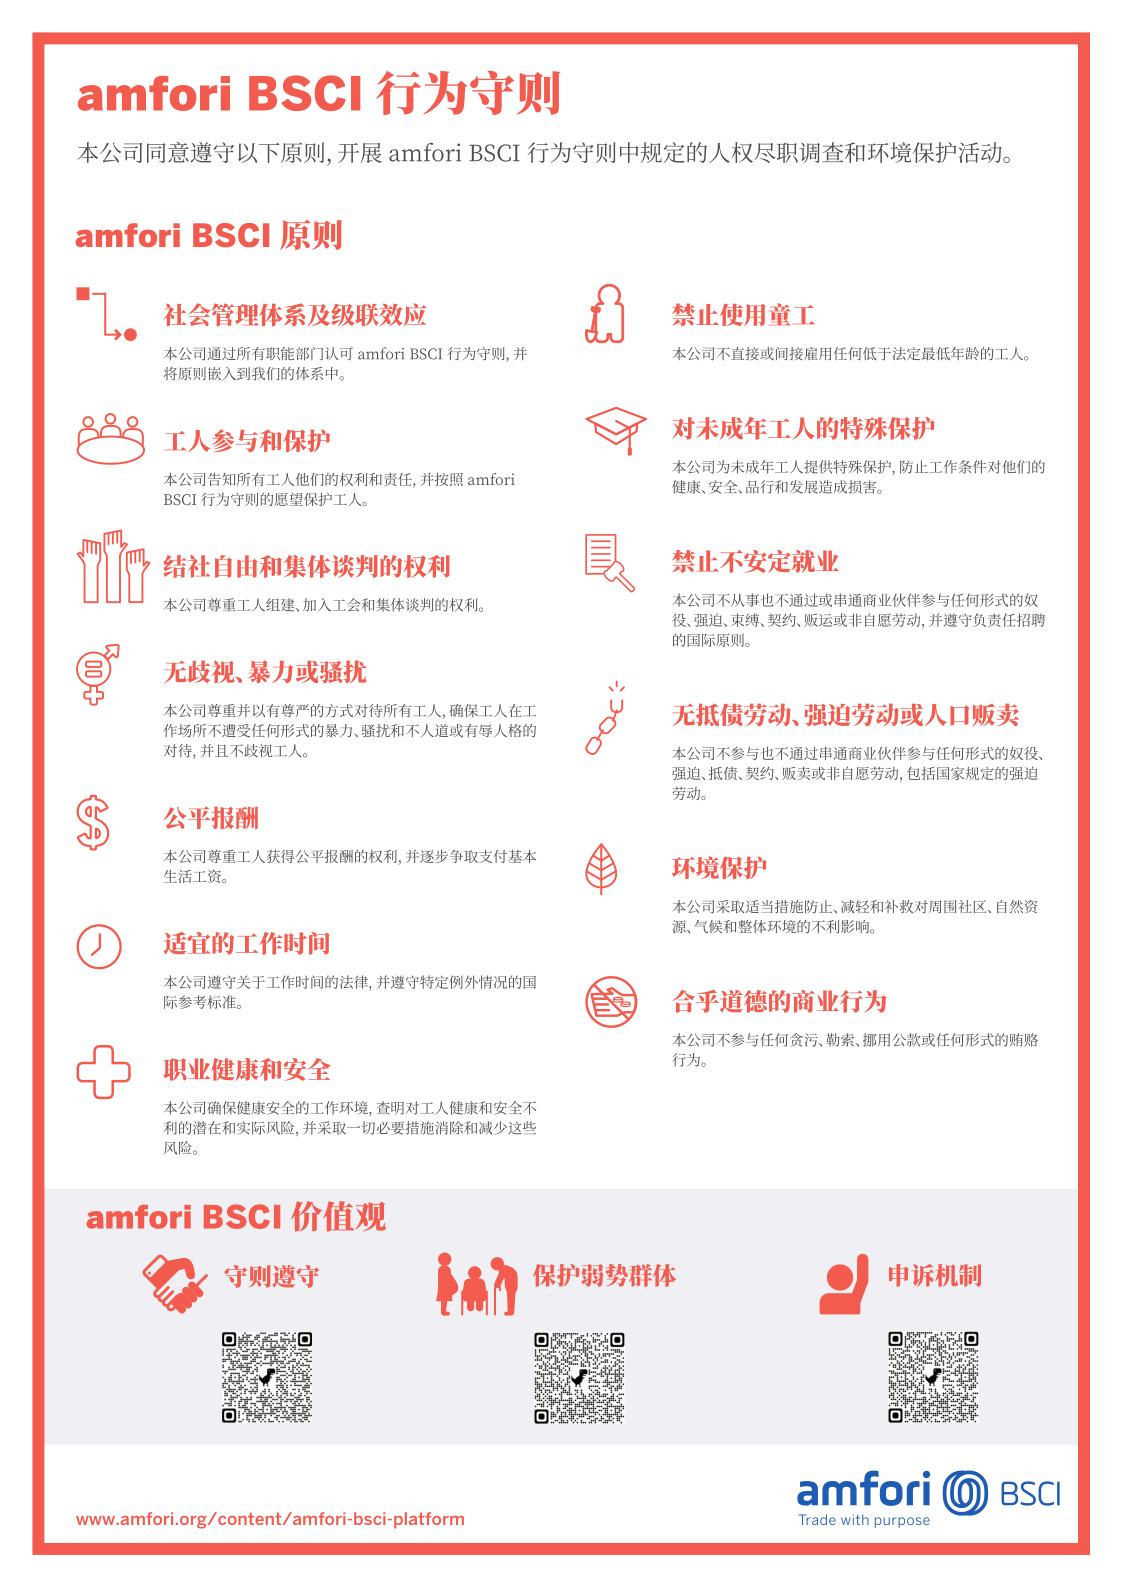 amfori BSCI CoC Poster - Chinese - December 2021_1.png